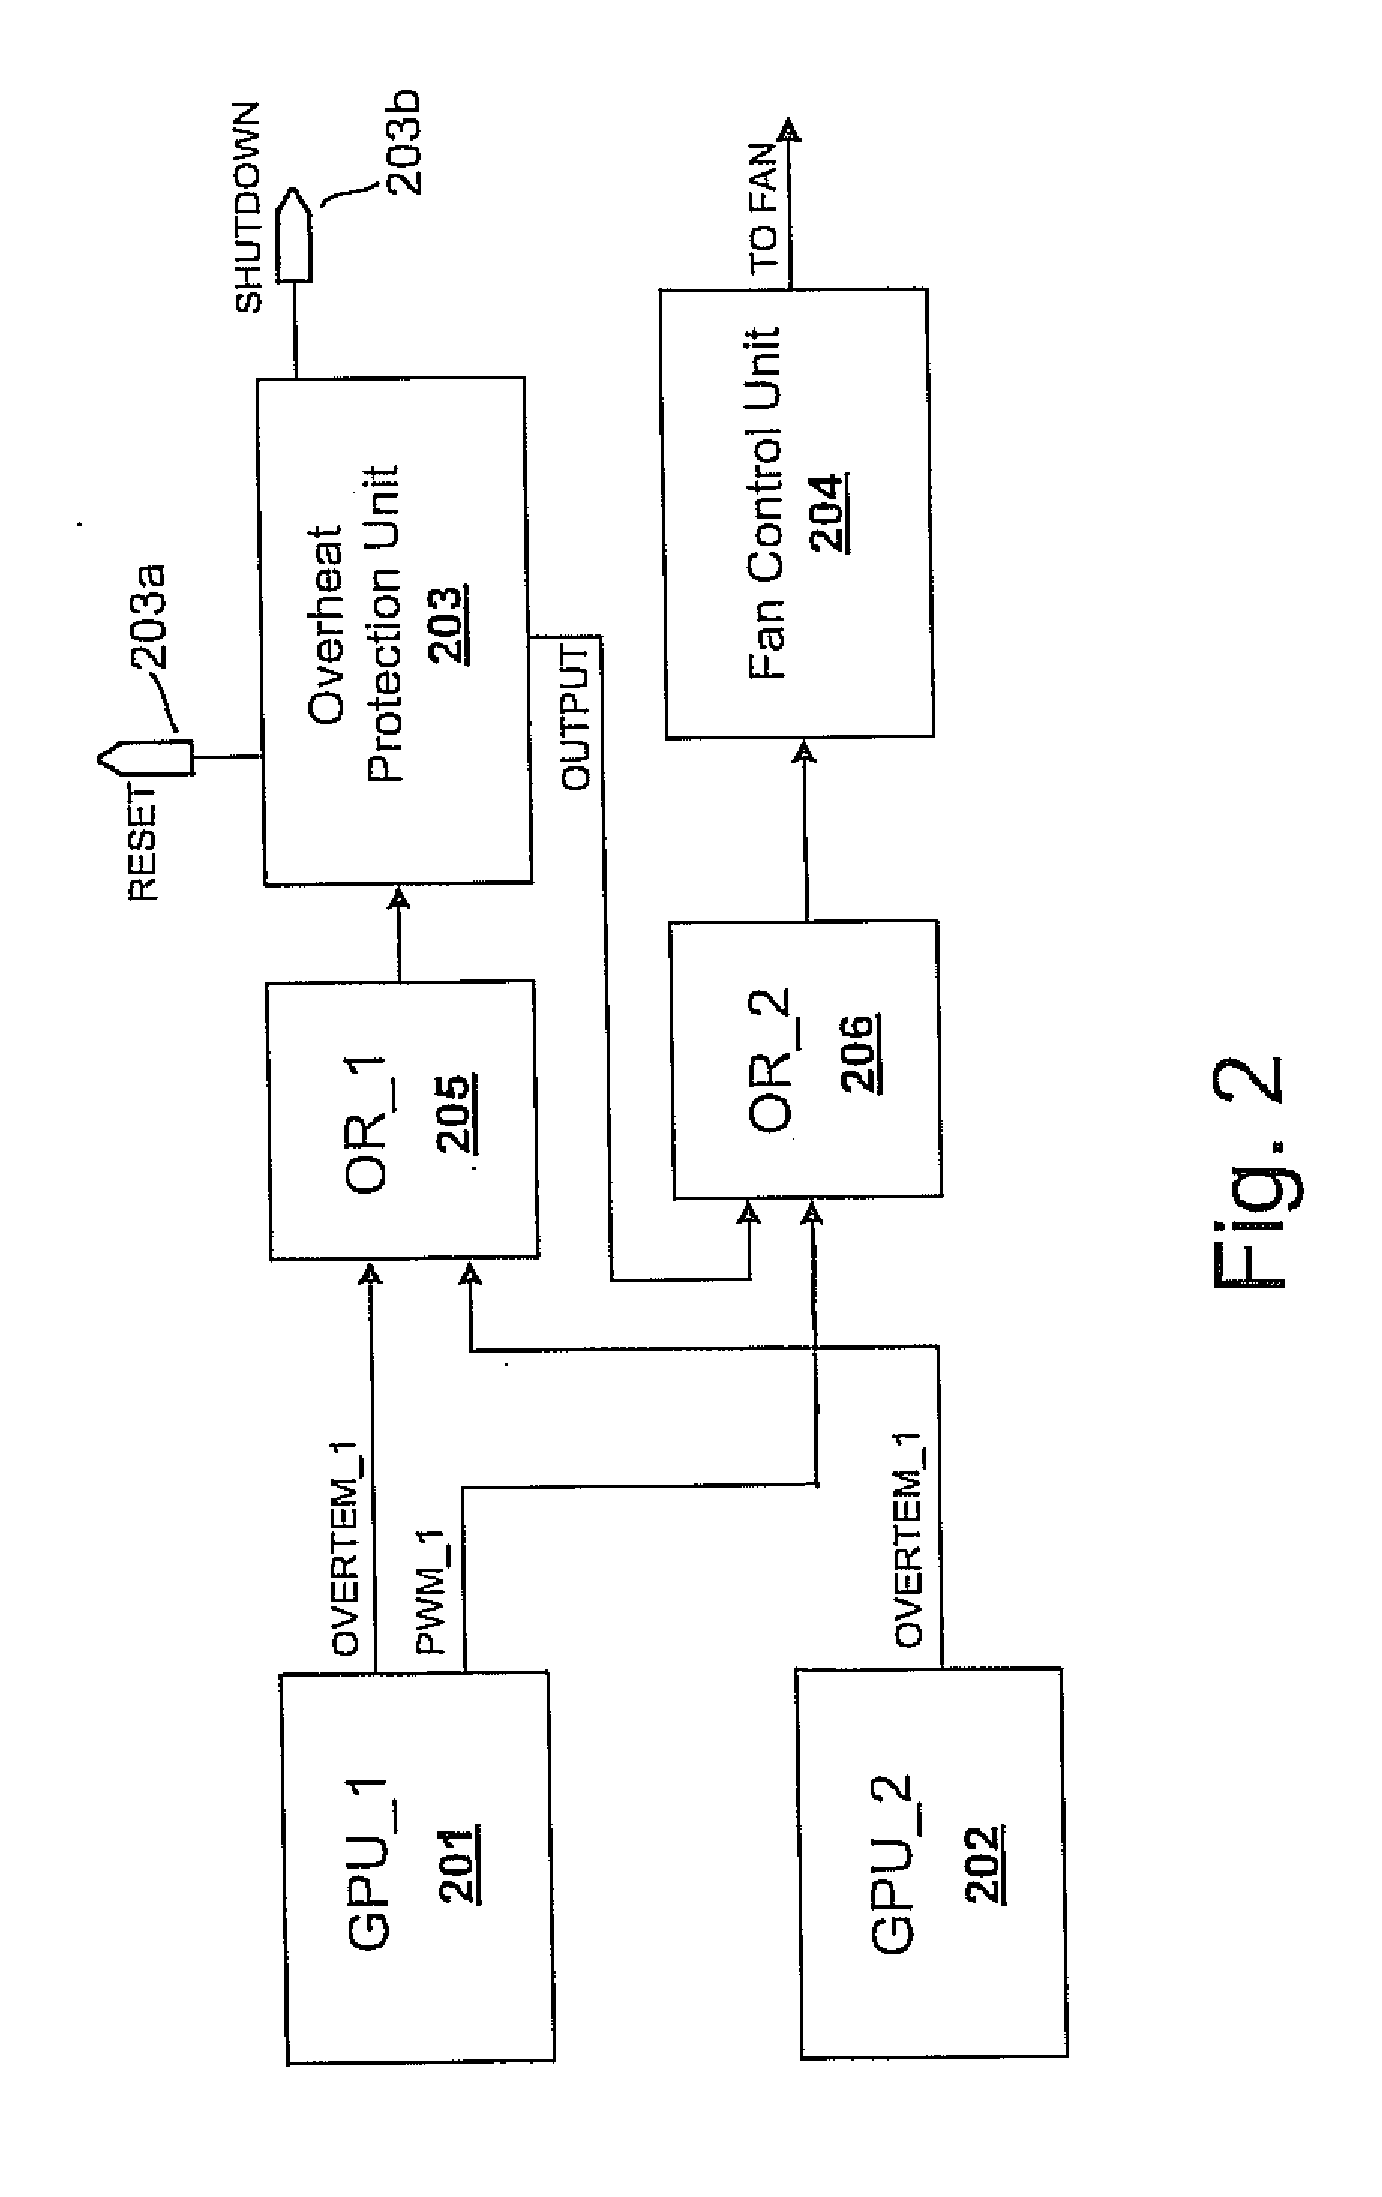 Circuit, system and method for controlling heat dissipation for multiple units on a circuit board